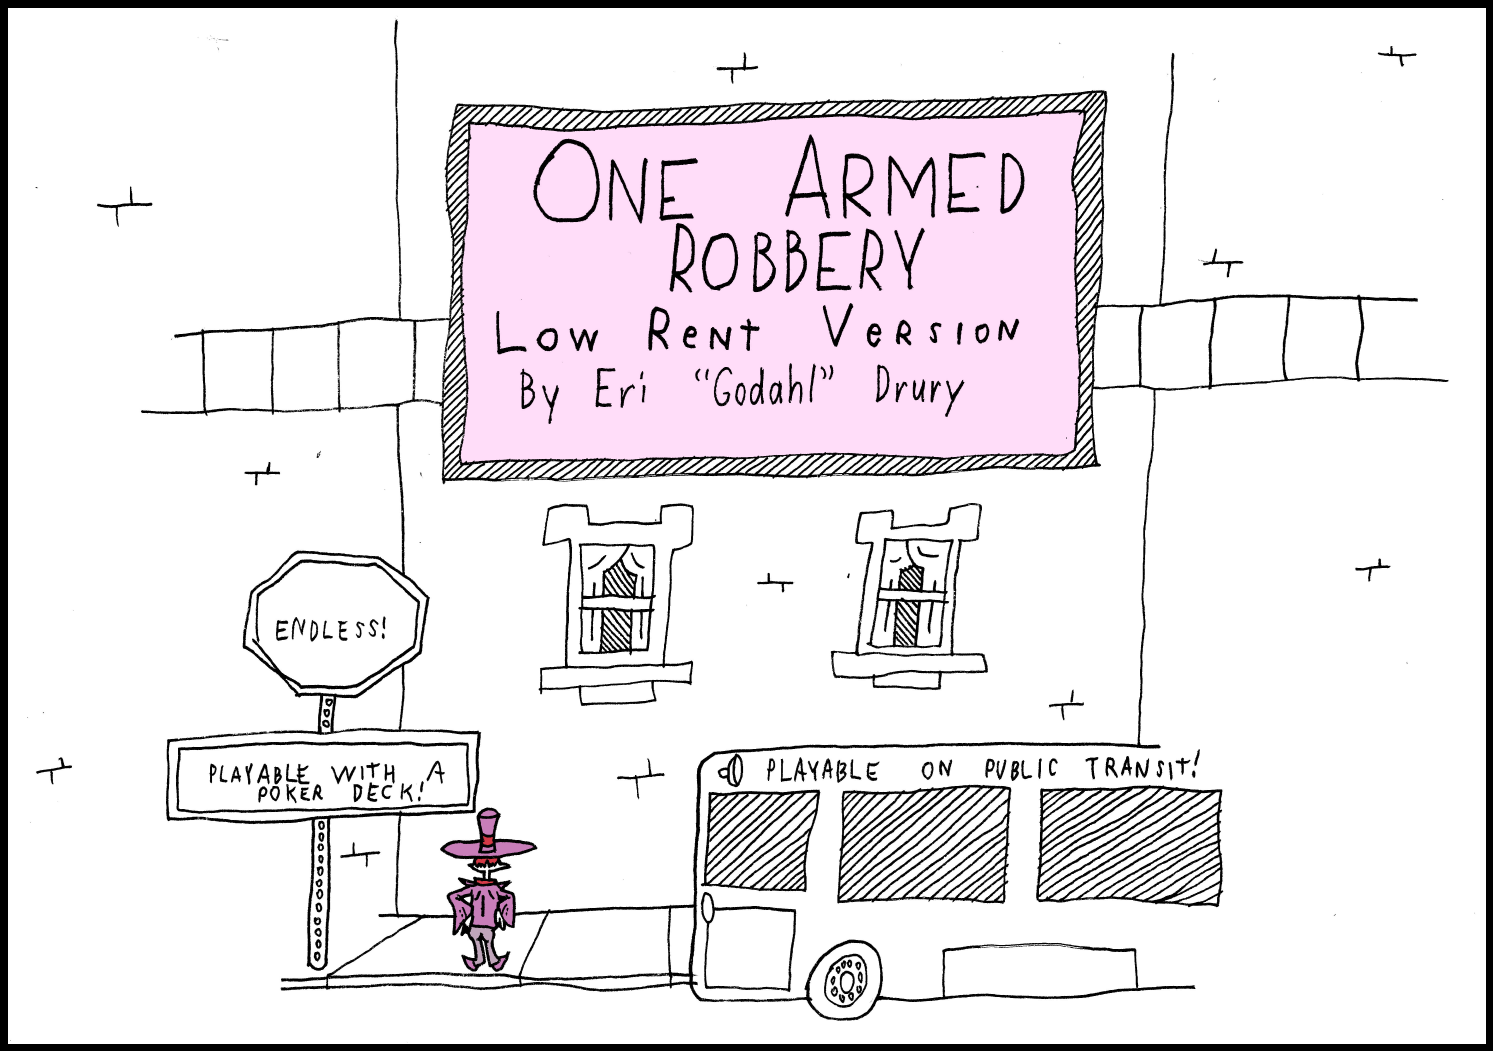 Lizzie Smithson stands between a bus and a stop sign, and looks up at a sign with the words One Armed Robbery, Low Rent Edition, by Eri Godahl Drury, in big letters. Around her, the words Playable on a Bus! and Playable with a Poker Deck! and Endless! surround her.